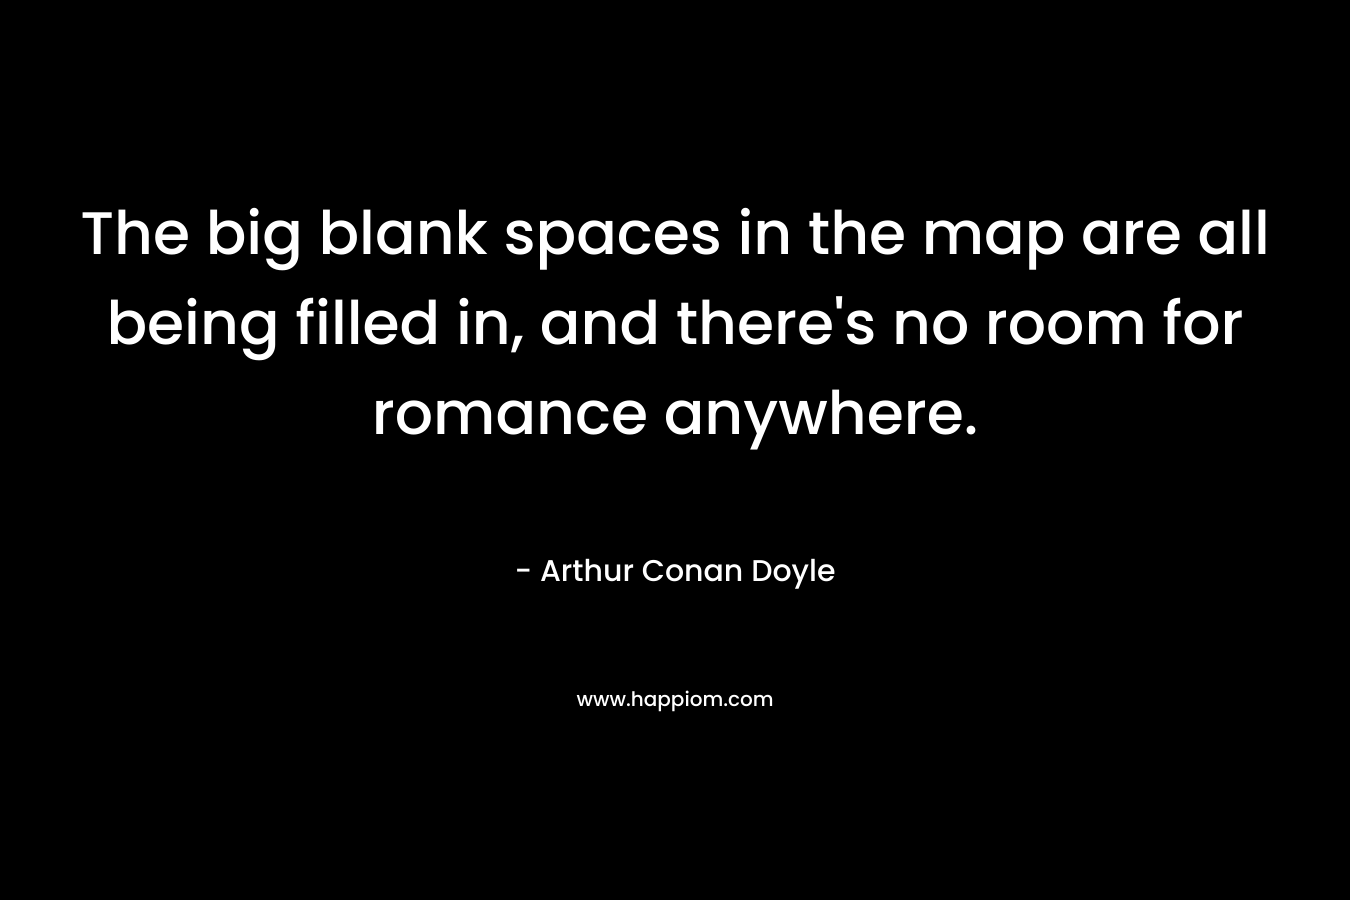 The big blank spaces in the map are all being filled in, and there's no room for romance anywhere.